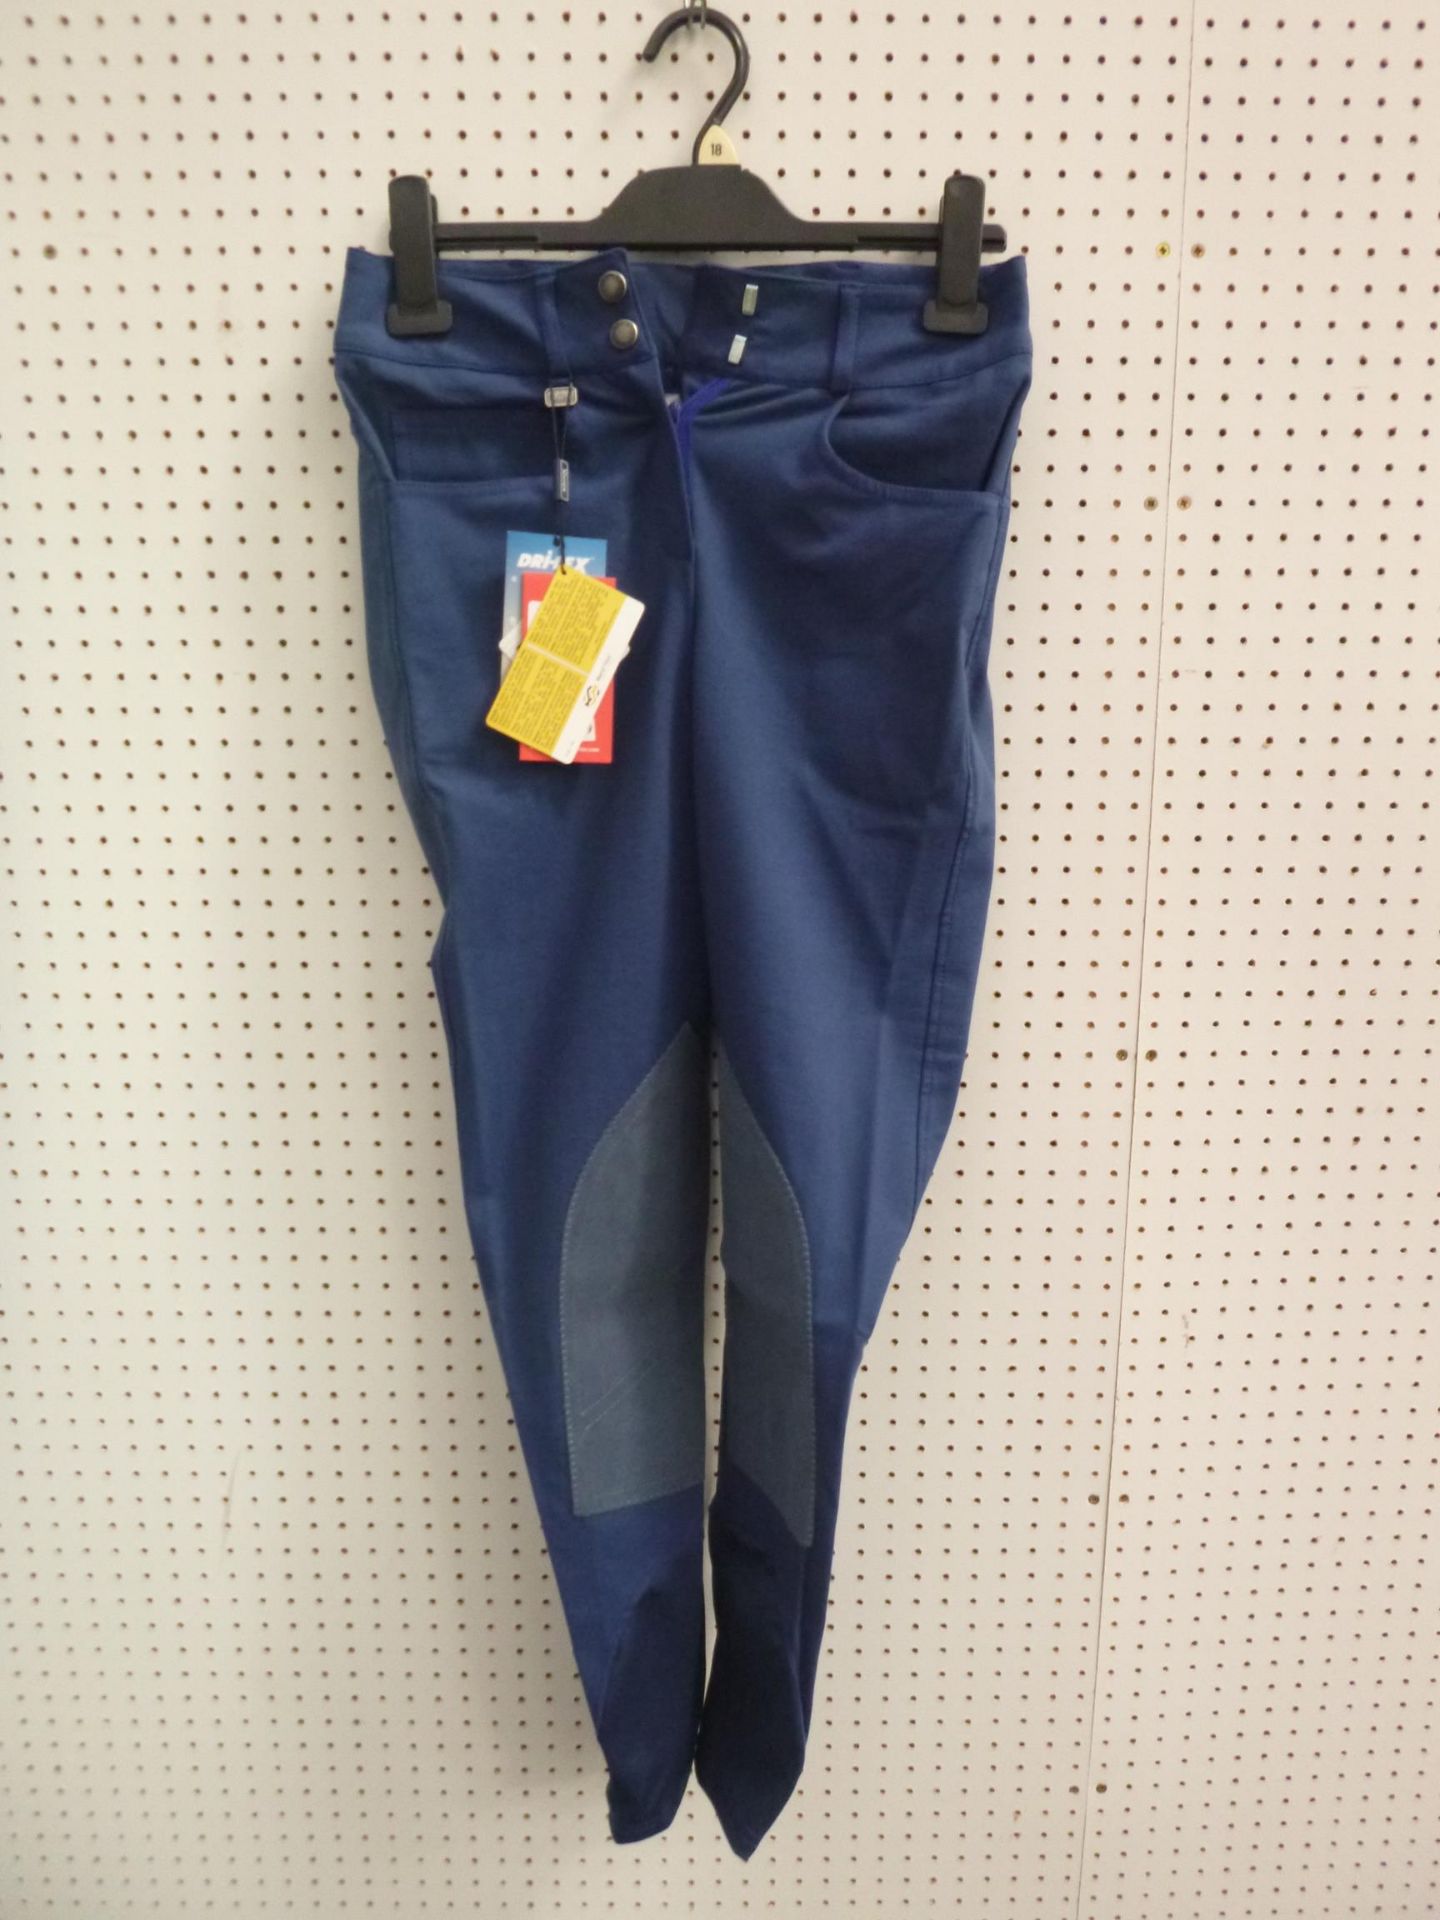 * Four Pairs of New Shires Ladies Winchester Breeches in Steel Blue. One each of size 24,32,34 and